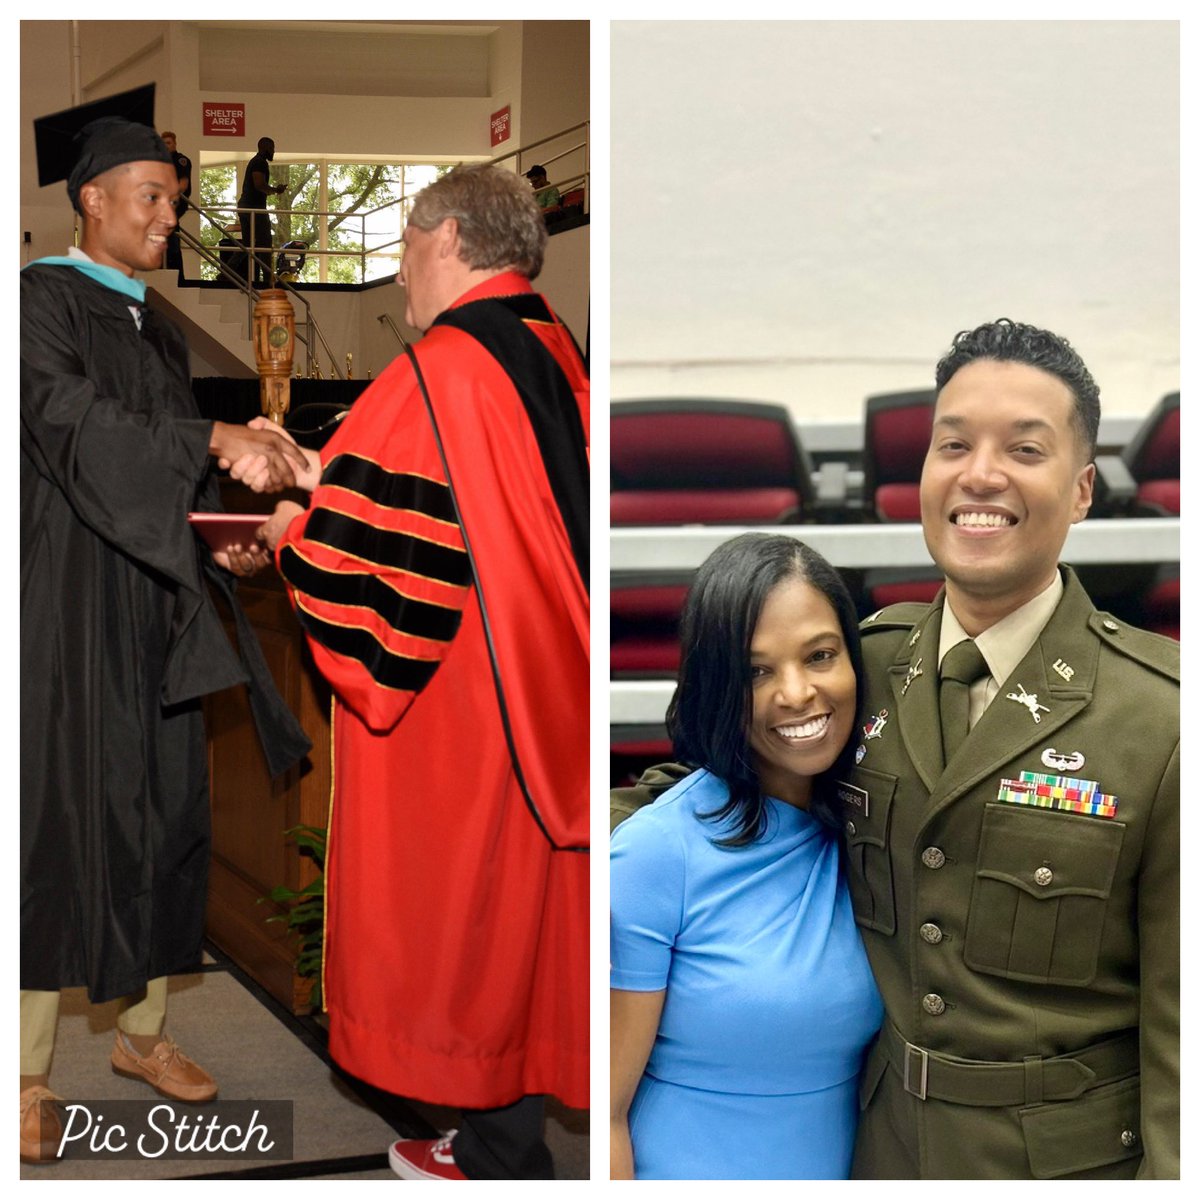 My ❤️is filled with joy and happiness. I am so proud of my oldest son for receiving his Masters degree and being commissioned as an officer in the US Army! 🥰🥰❤️❤️❤️#proudmom#2ndLieutenant#Leadership